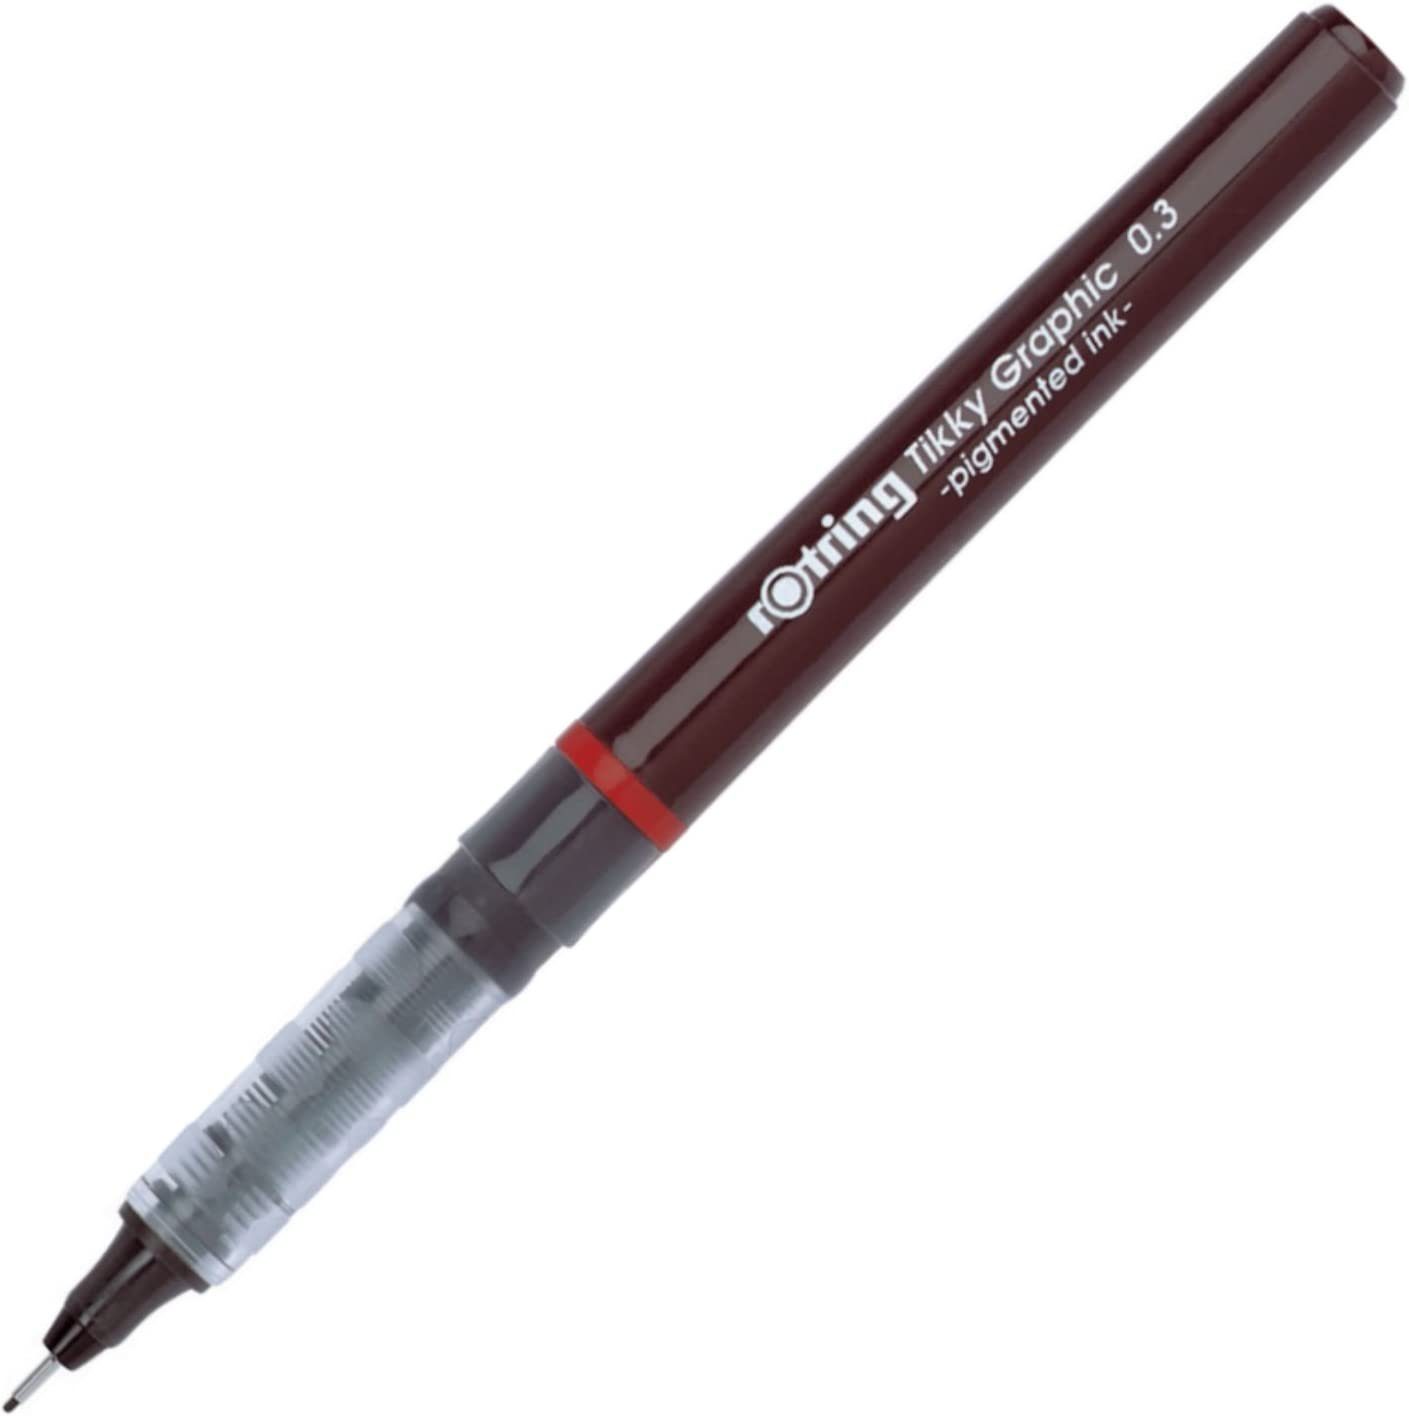 Tinte ROTRING Fineliner Tikky Graphic Fineliner schwarze Rotring 1904753, 0,3 mm,